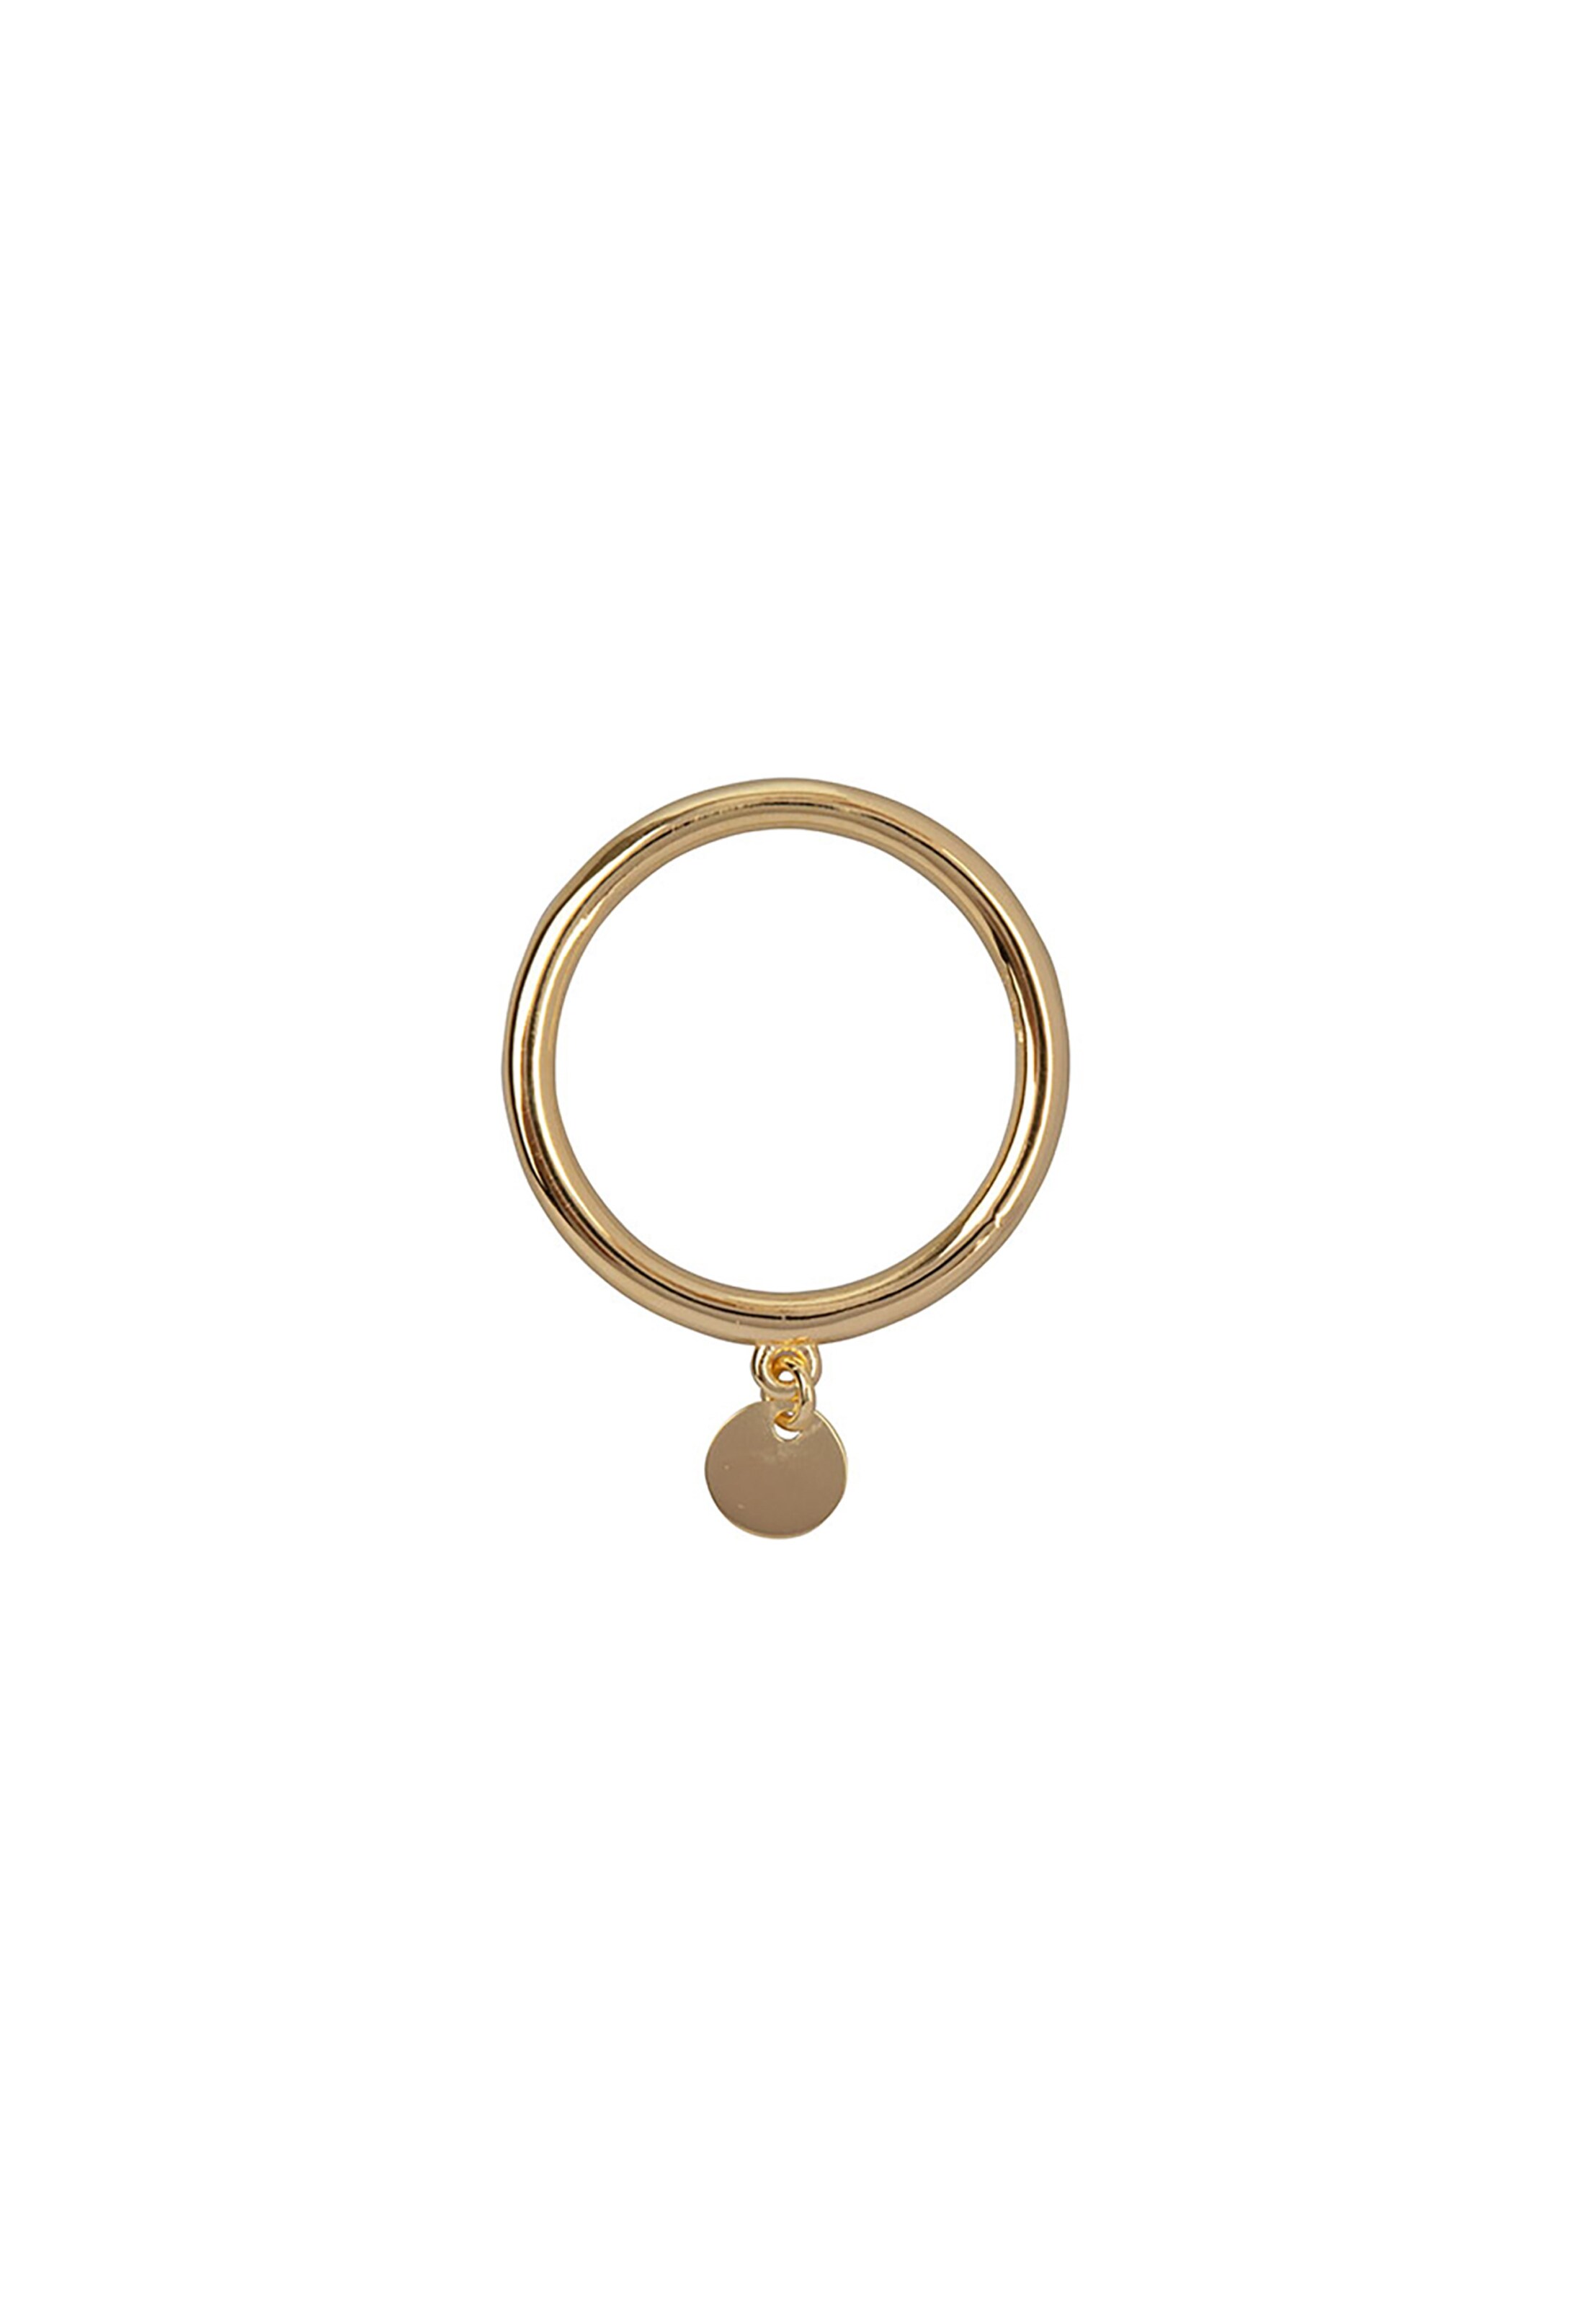 Ana Dyla Ring in Gold 